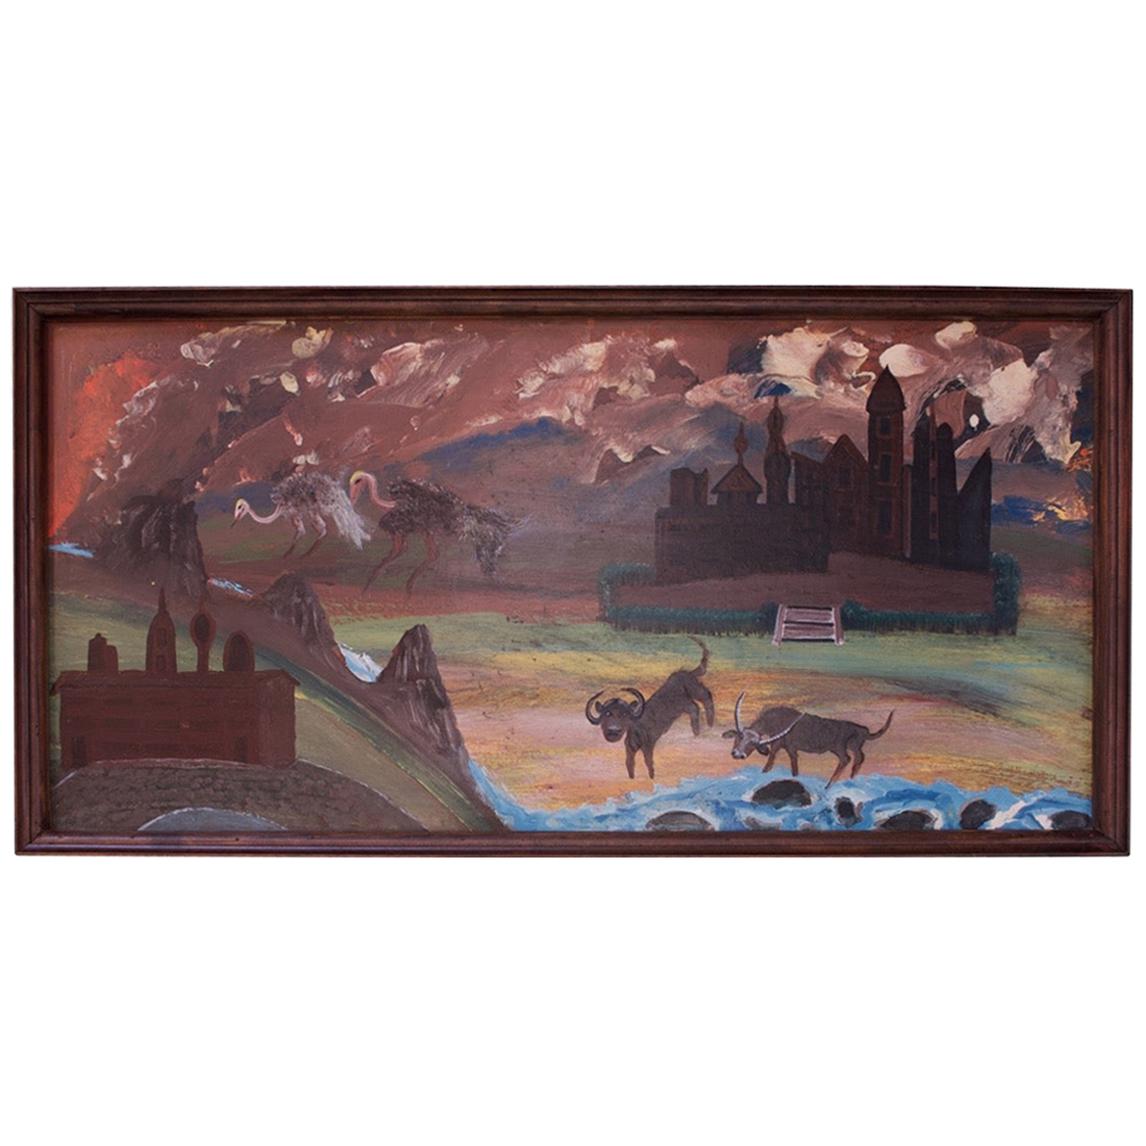 Outsider Art "Animals and Castles" Oil on Panel by Bruno Del Favero